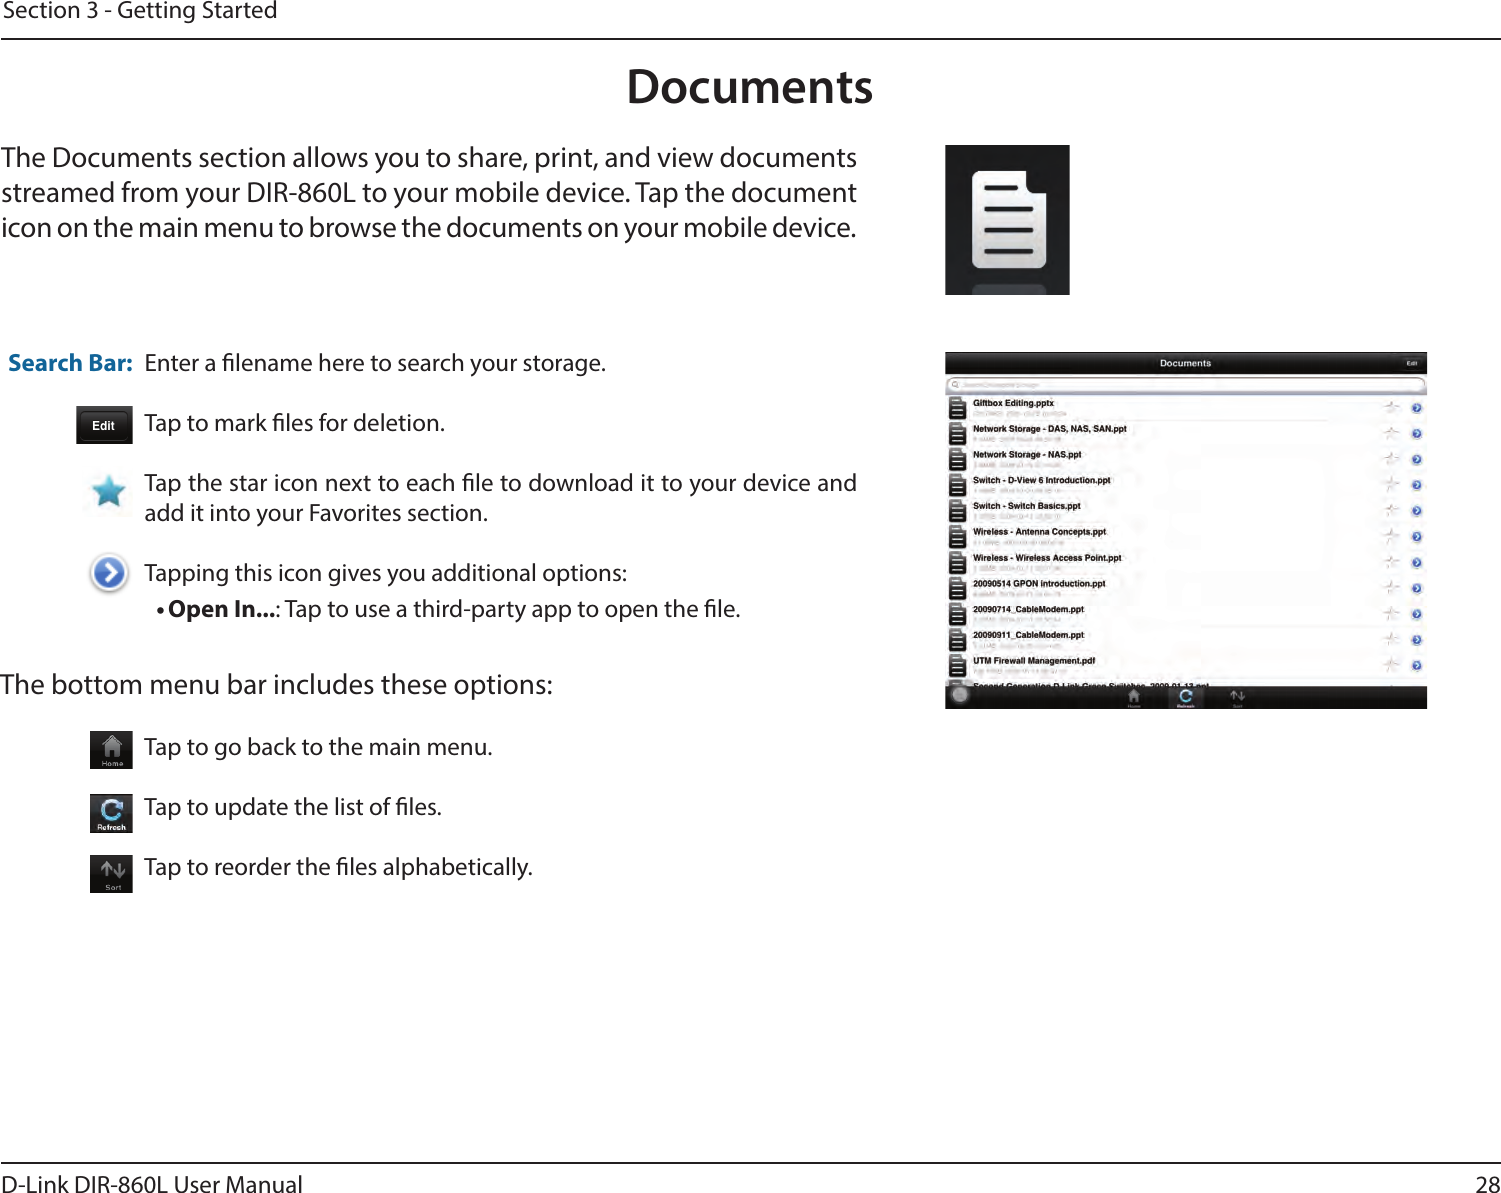 28D-Link DIR-860L User ManualSection 3 - Getting StartedDocumentsThe Documents section allows you to share, print, and view documents streamed from your DIR-860L to your mobile device. Tap the document icon on the main menu to browse the documents on your mobile device.Enter a lename here to search your storage.Tap to mark les for deletion.Tap the star icon next to each le to download it to your device and add it into your Favorites section.Tapping this icon gives you additional options:• Open In...: Tap to use a third-party app to open the le.The bottom menu bar includes these options:Search Bar: Tap to go back to the main menu.Tap to update the list of les.Tap to reorder the les alphabetically.